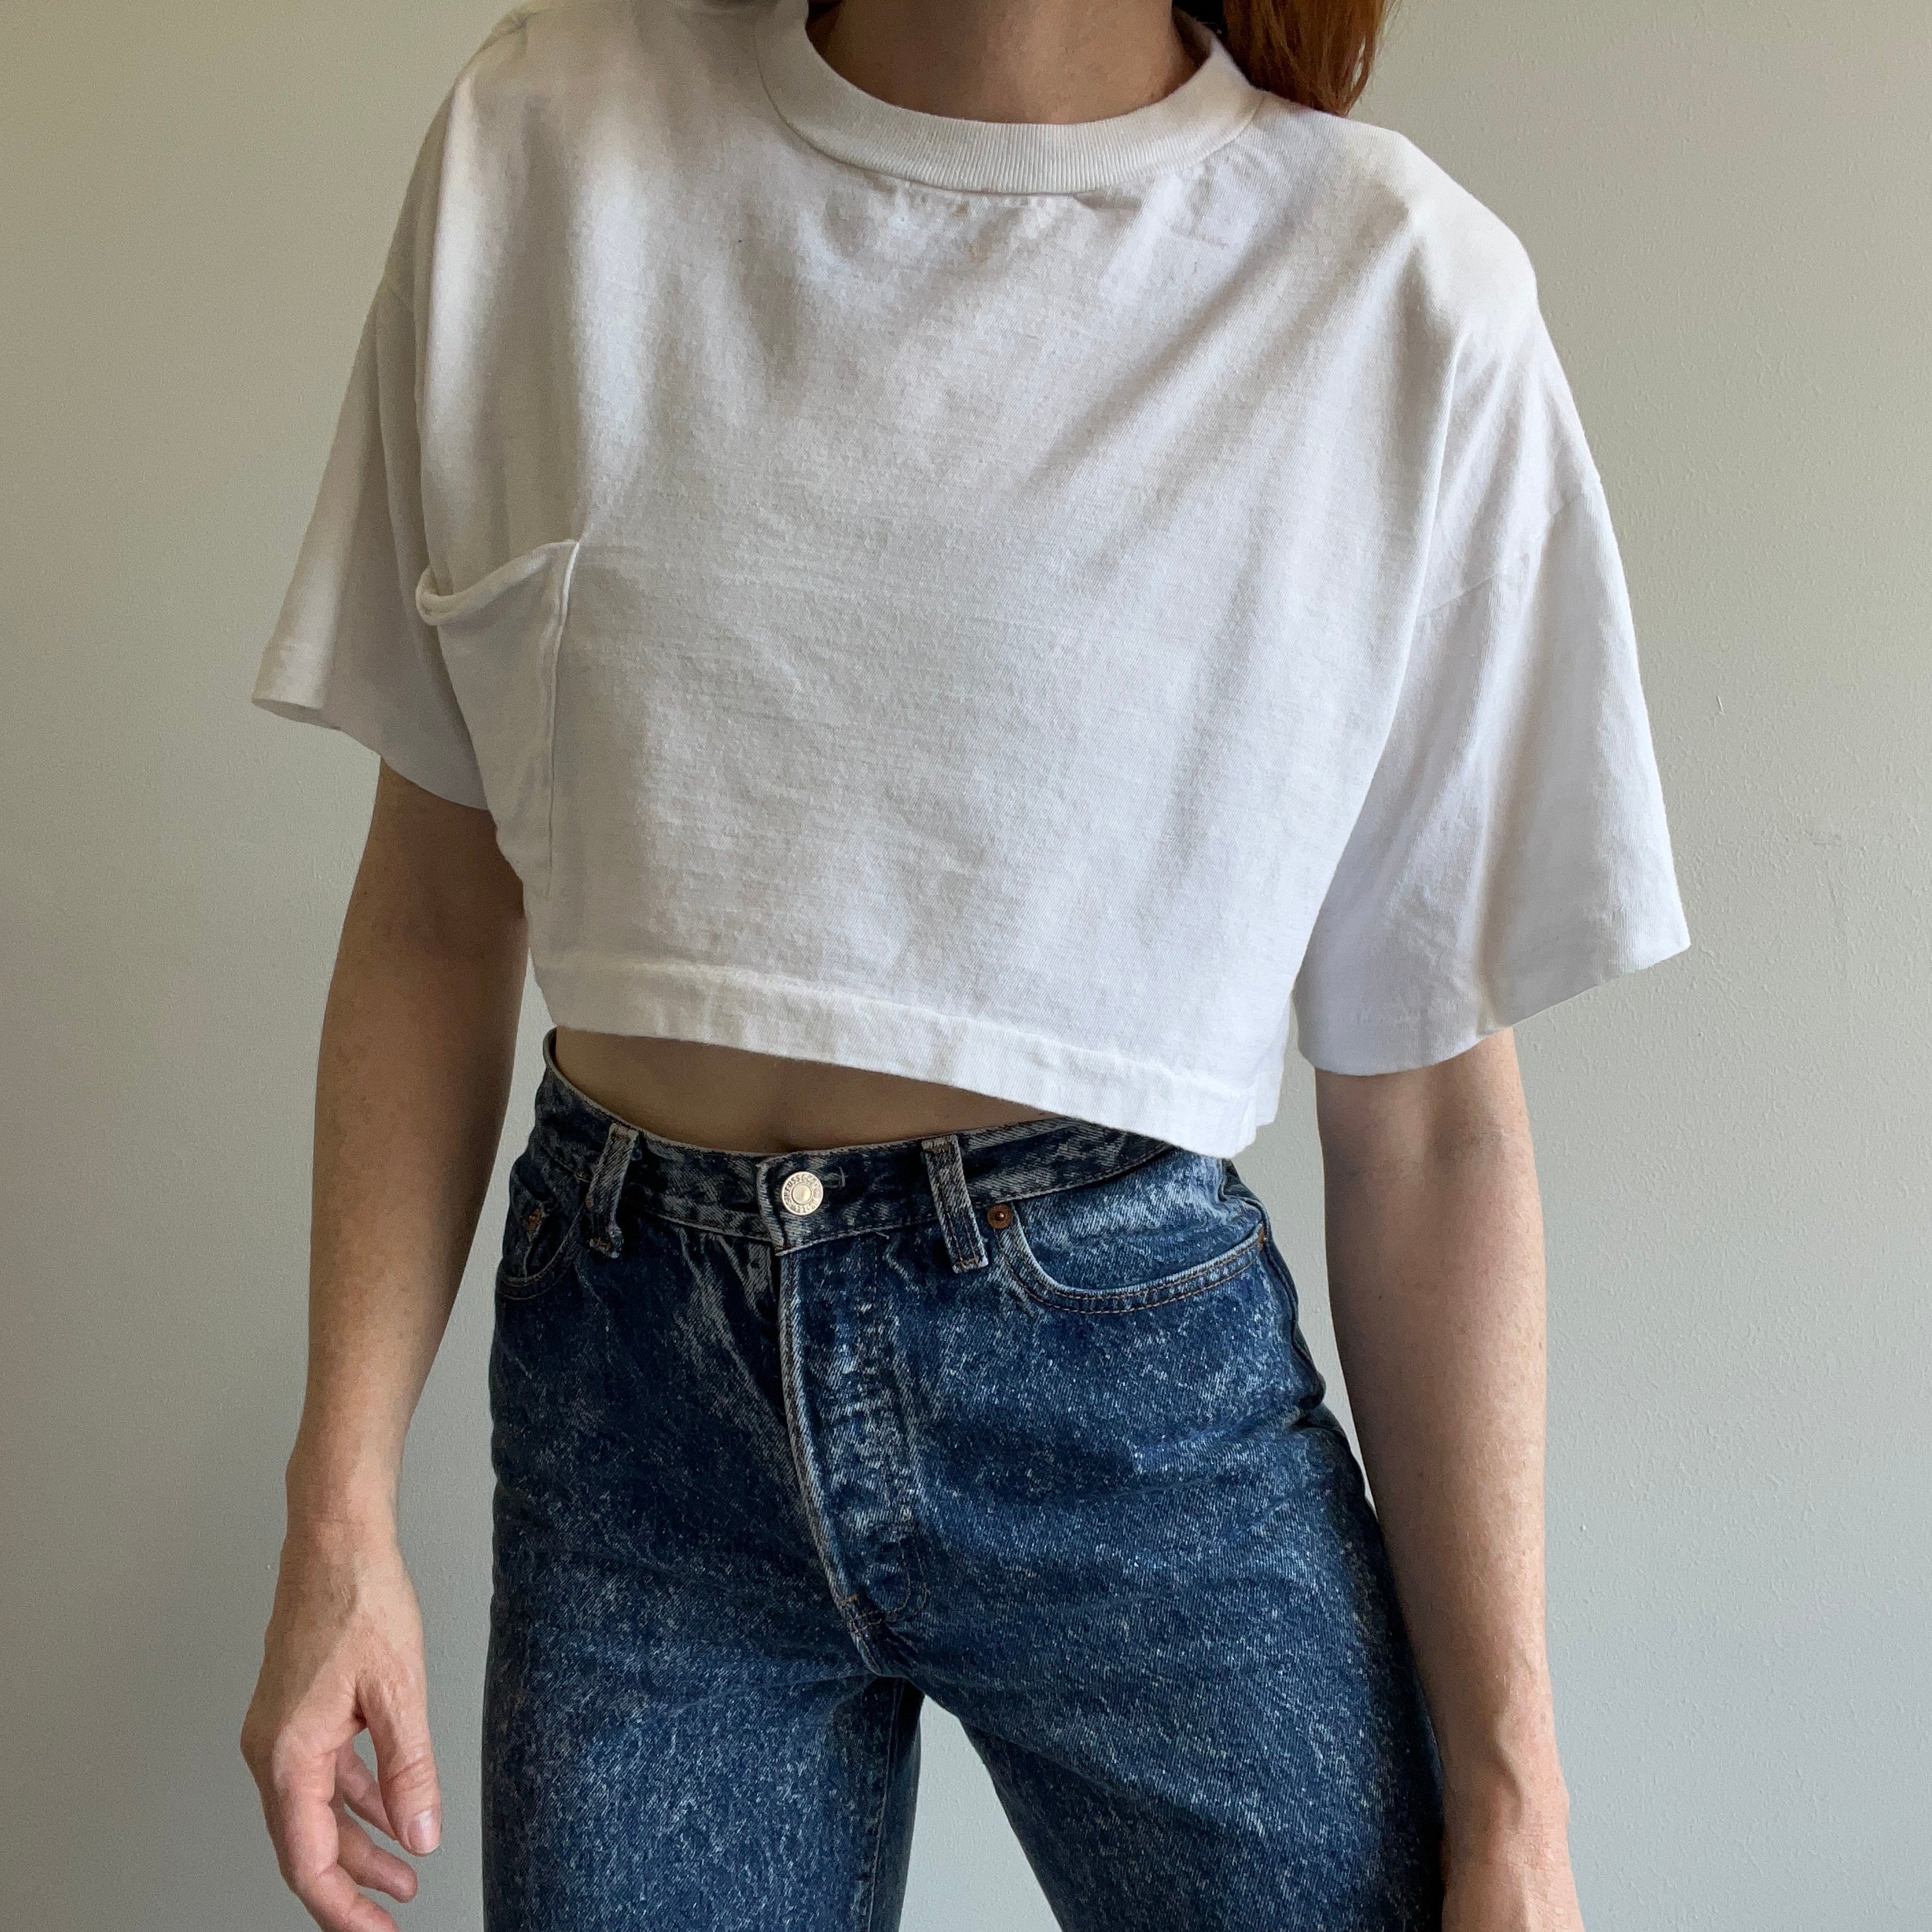 1980s Blank White Pocket T-Shirt Crop Top with Shoulder Pads!!!